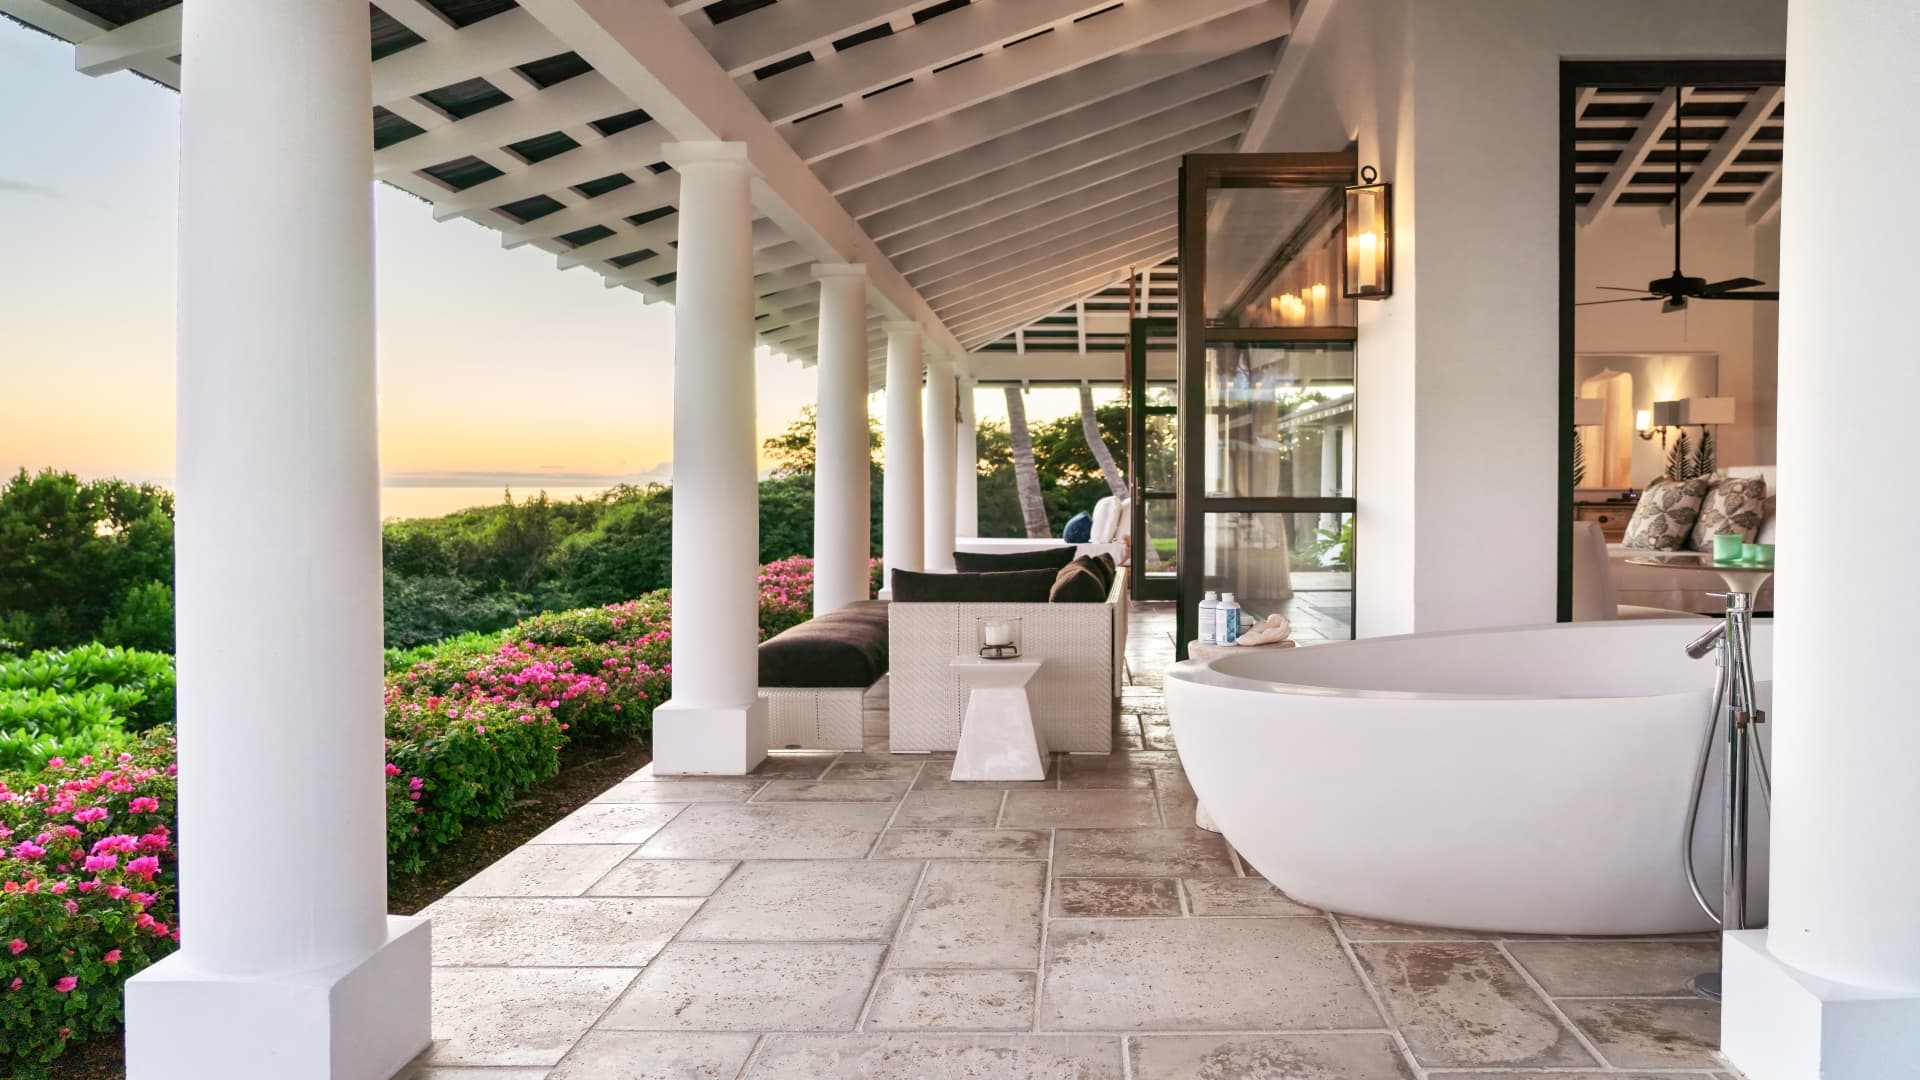 There is an outdoor bathtub on the owner's suite terrace.